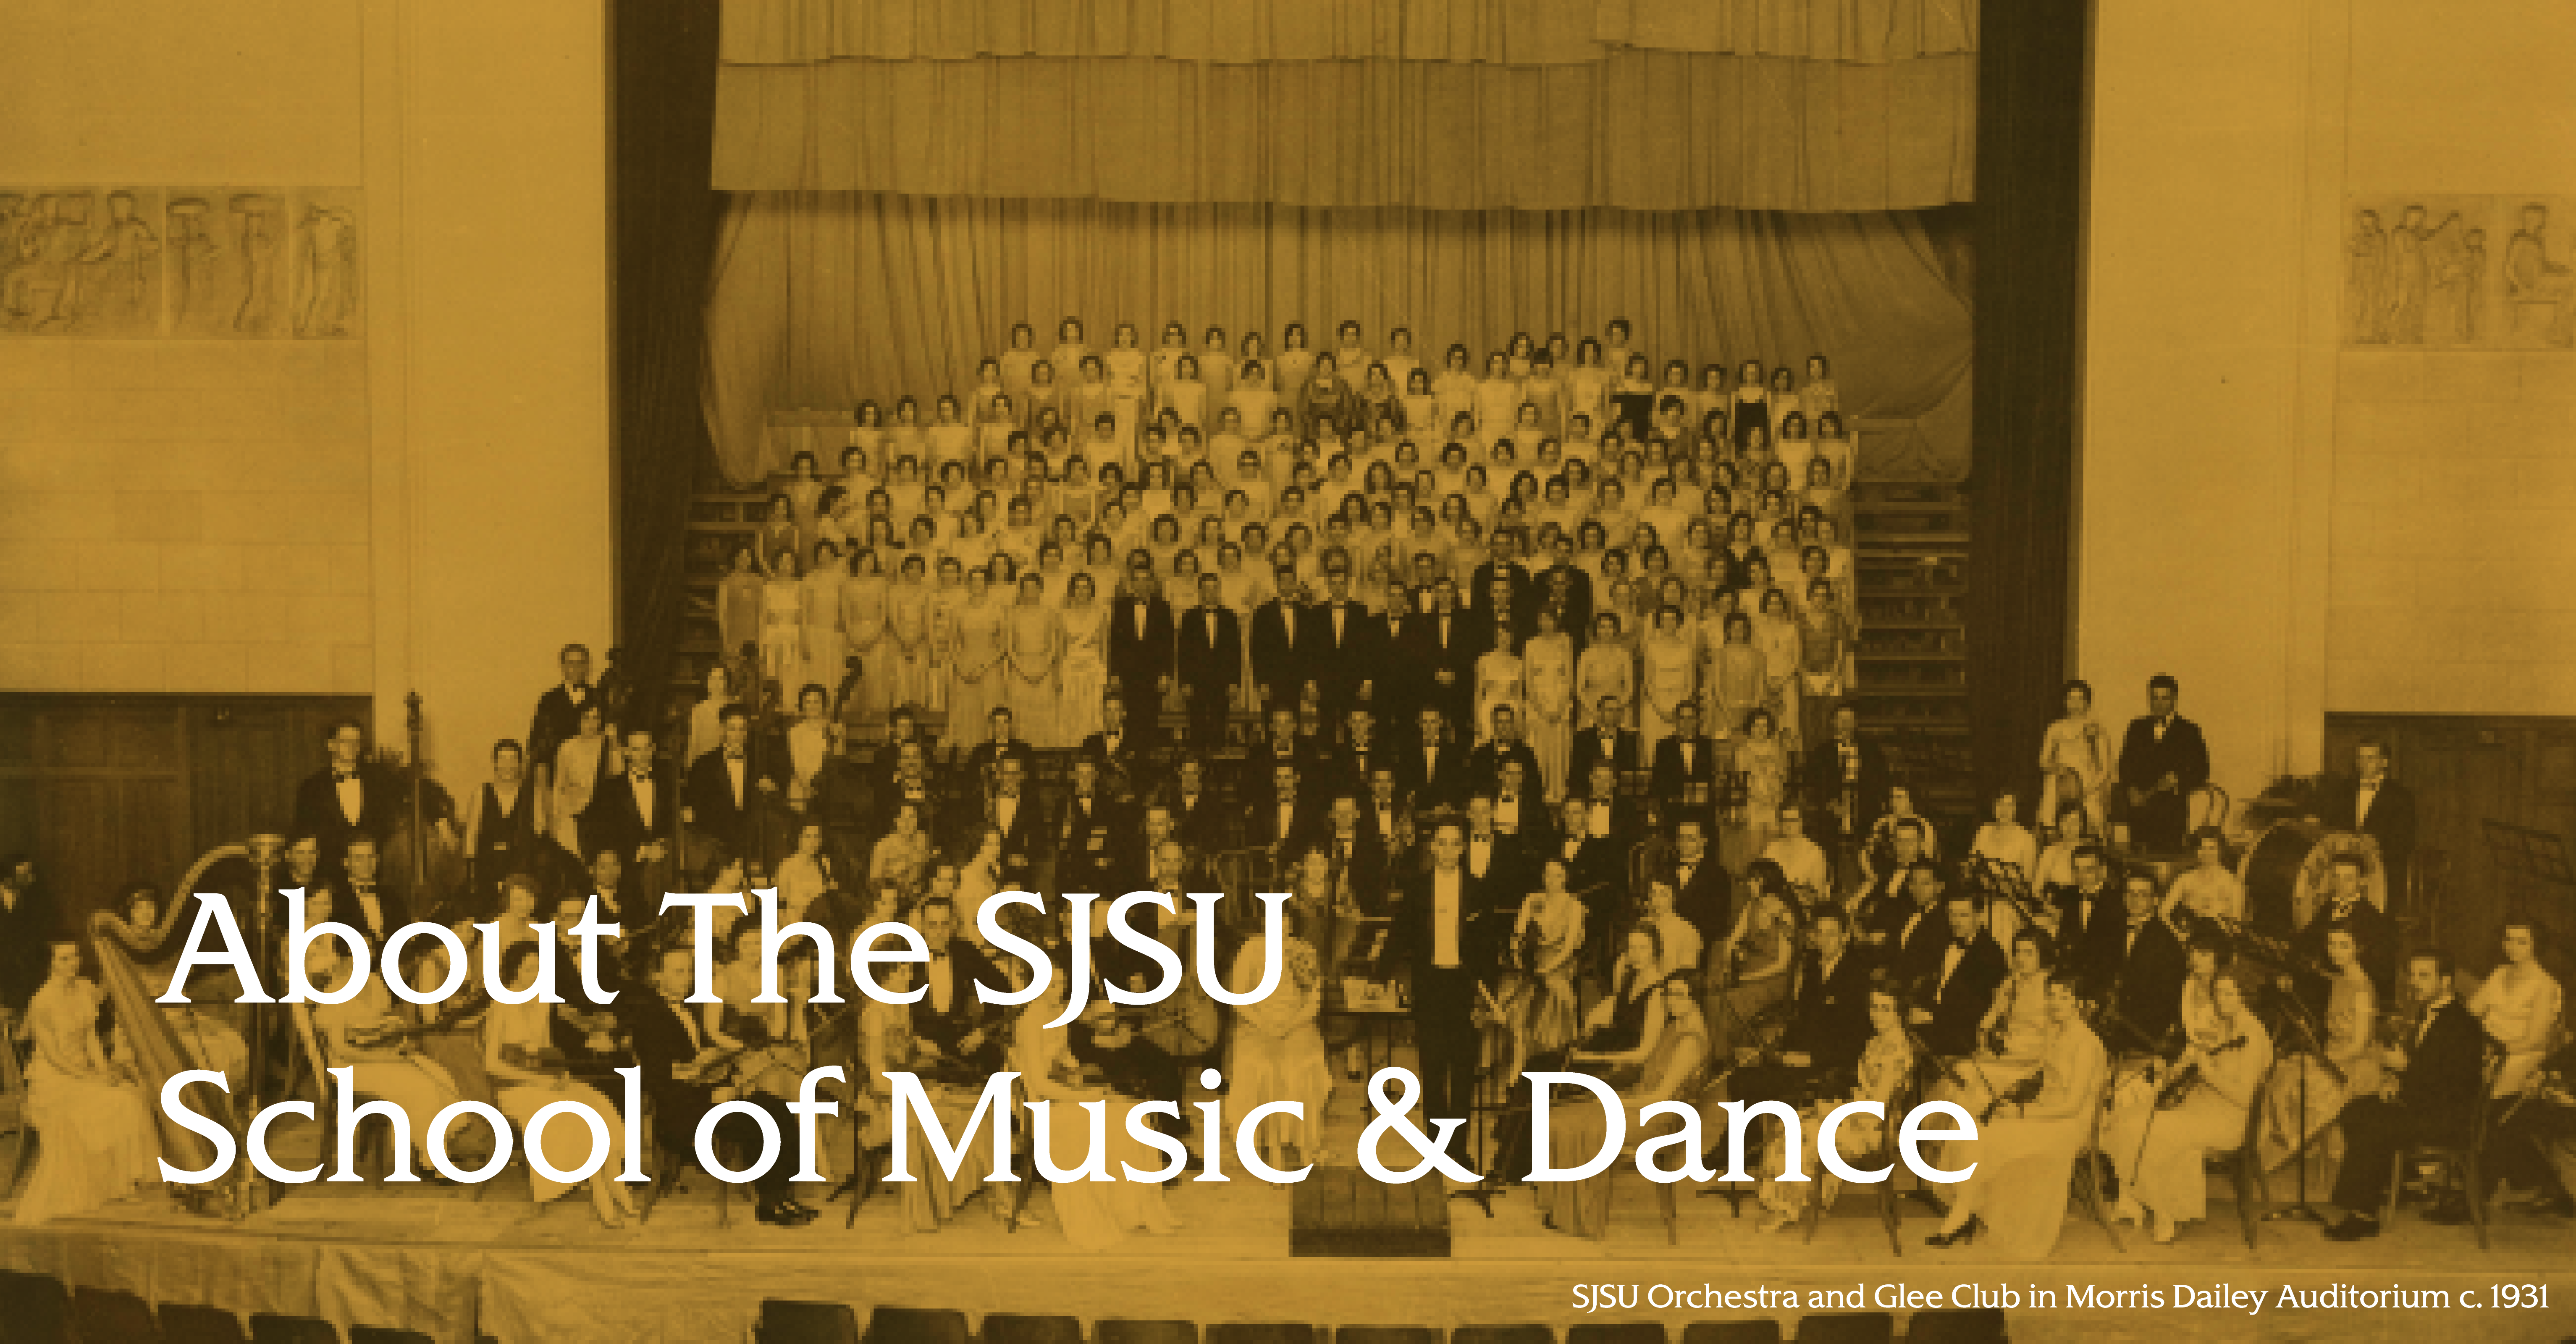 Historic image of School of Music and Dance musicians and dancers on stage.